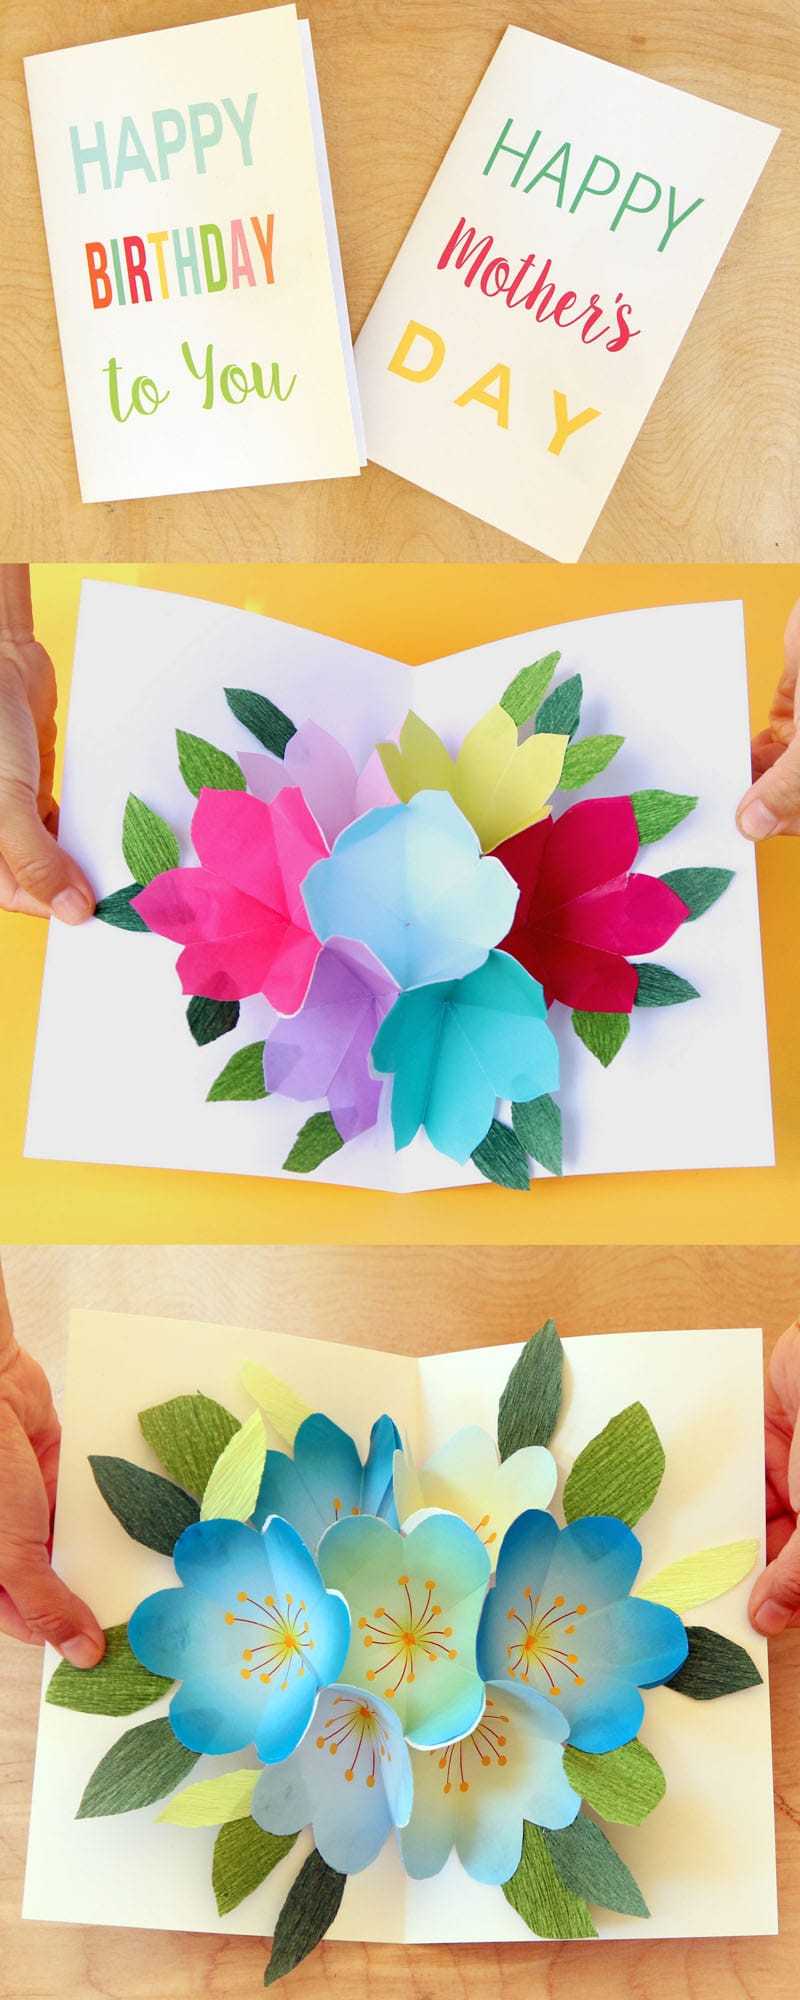 Free Printable Happy Birthday Card With Pop Up Bouquet - A With Happy Birthday Pop Up Card Free Template